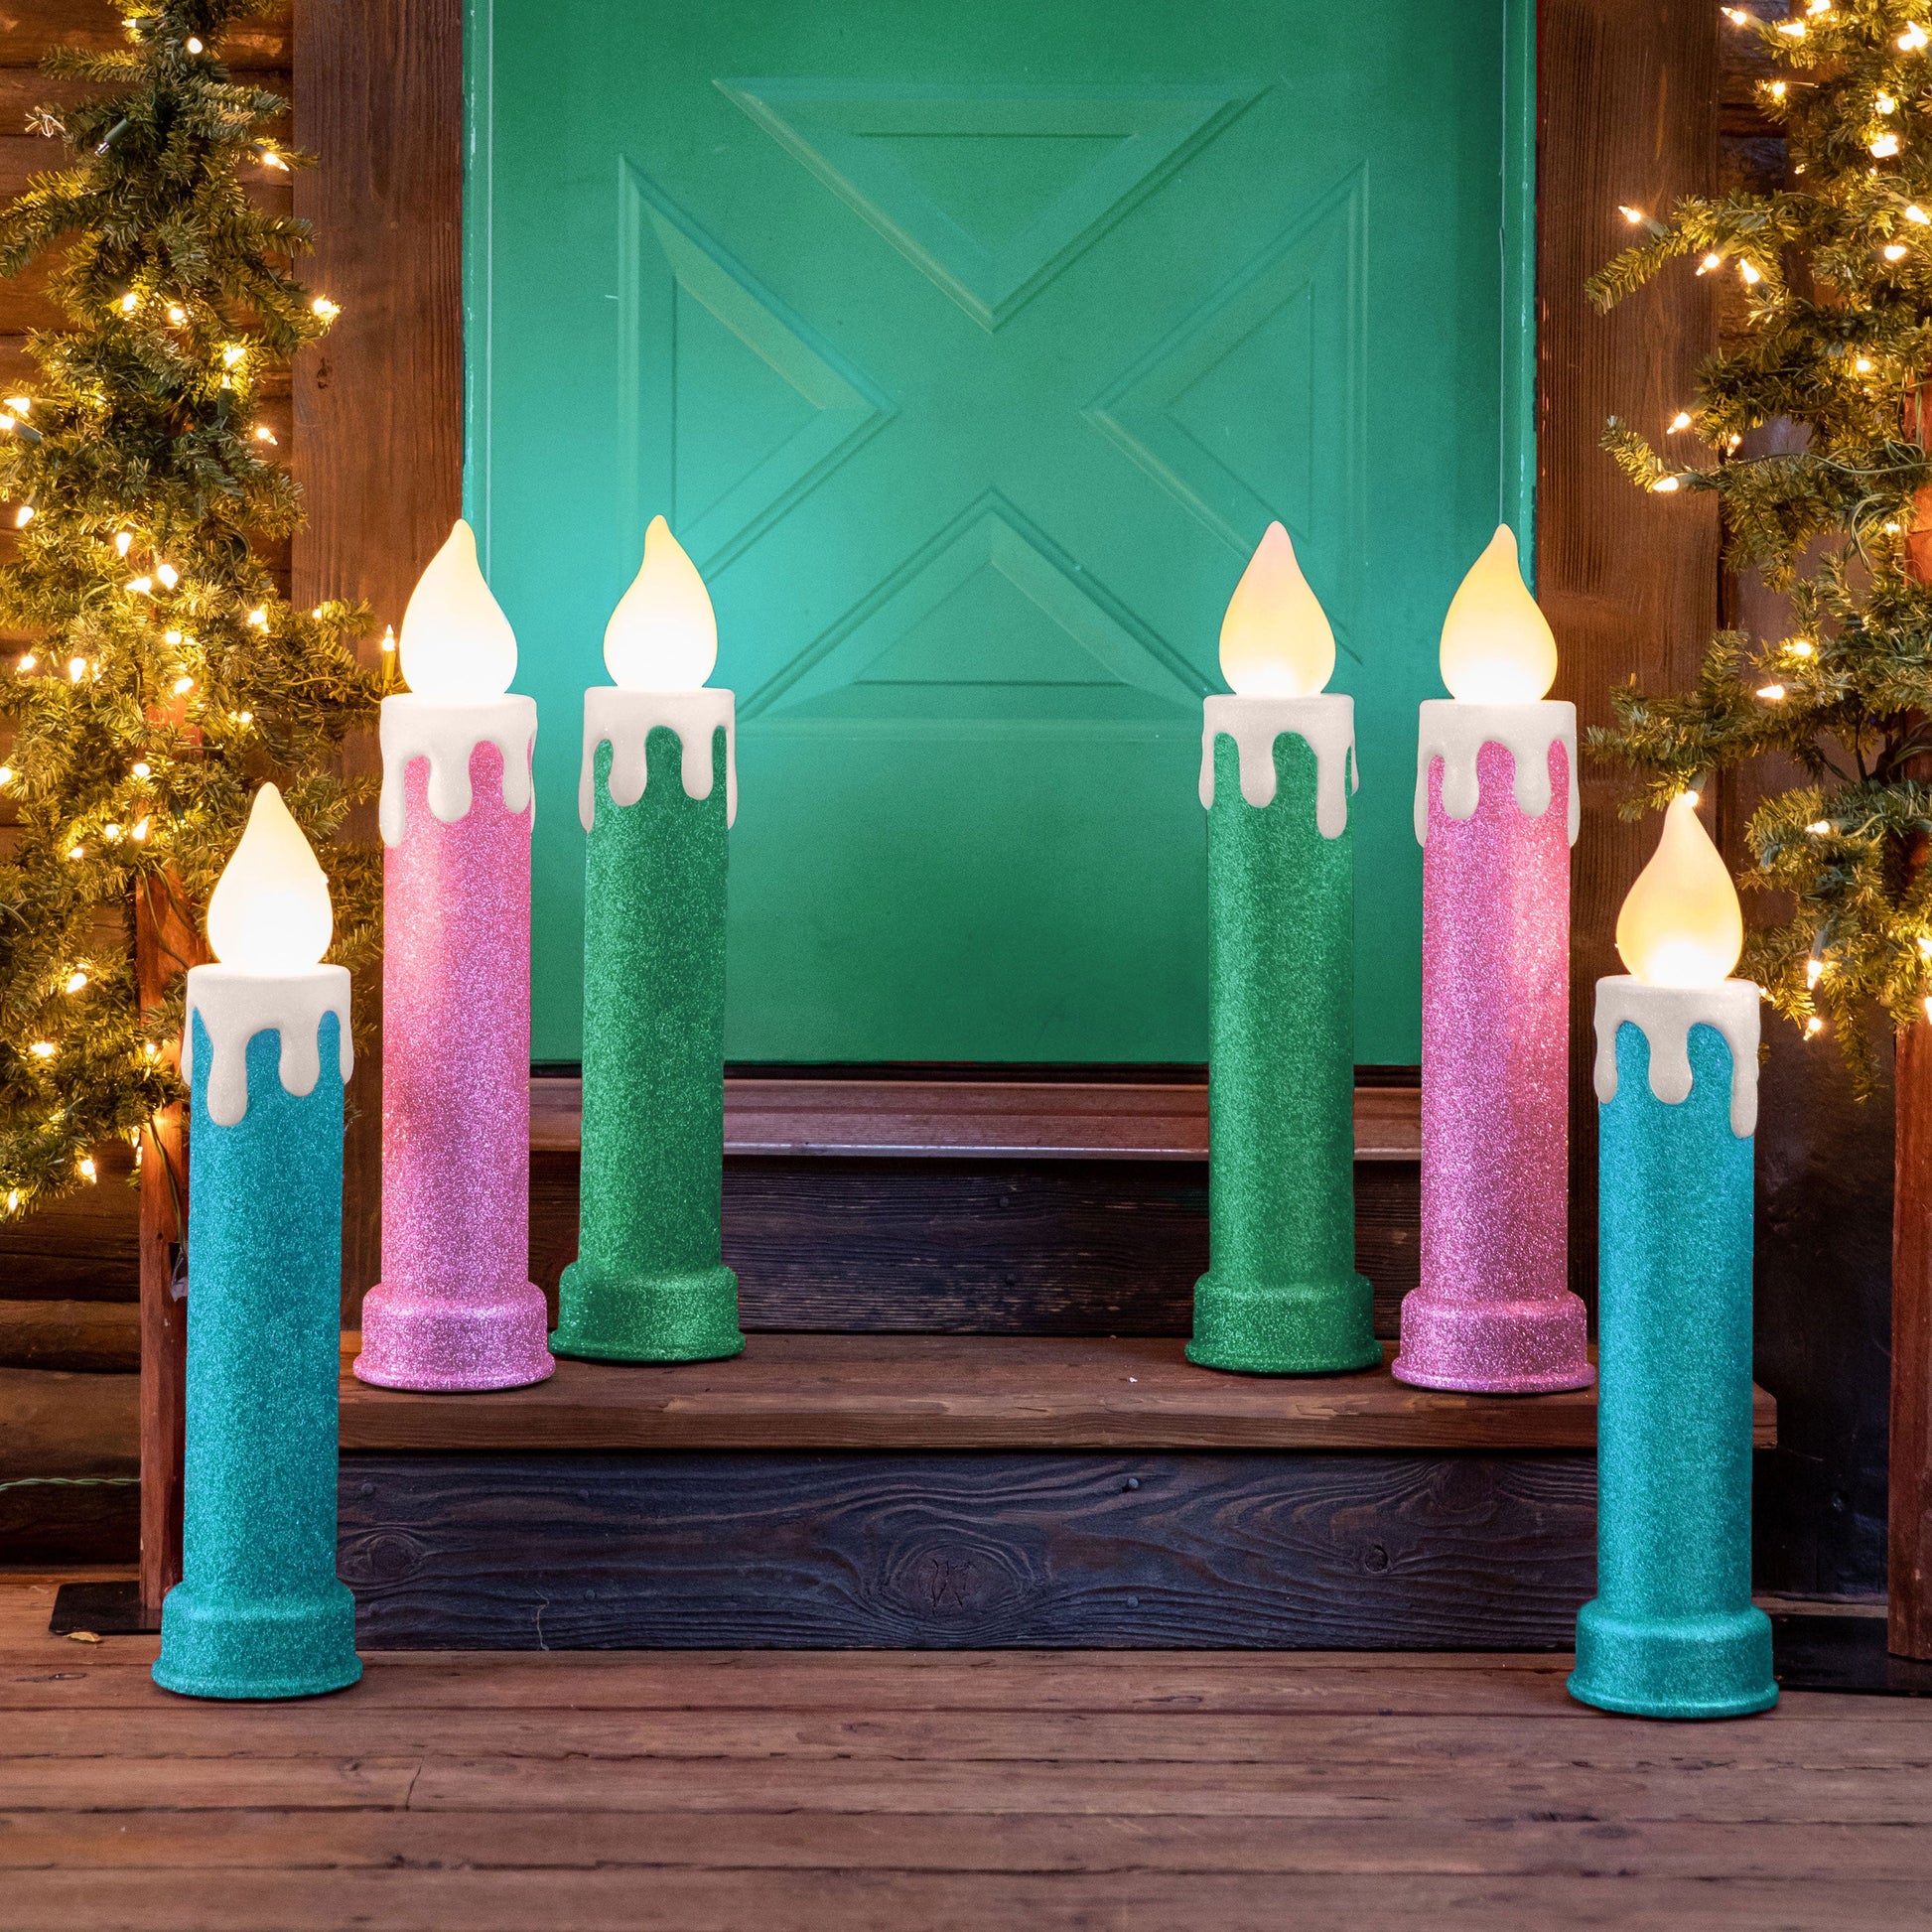 24" Set of 2 Blow Mold Candles - Green